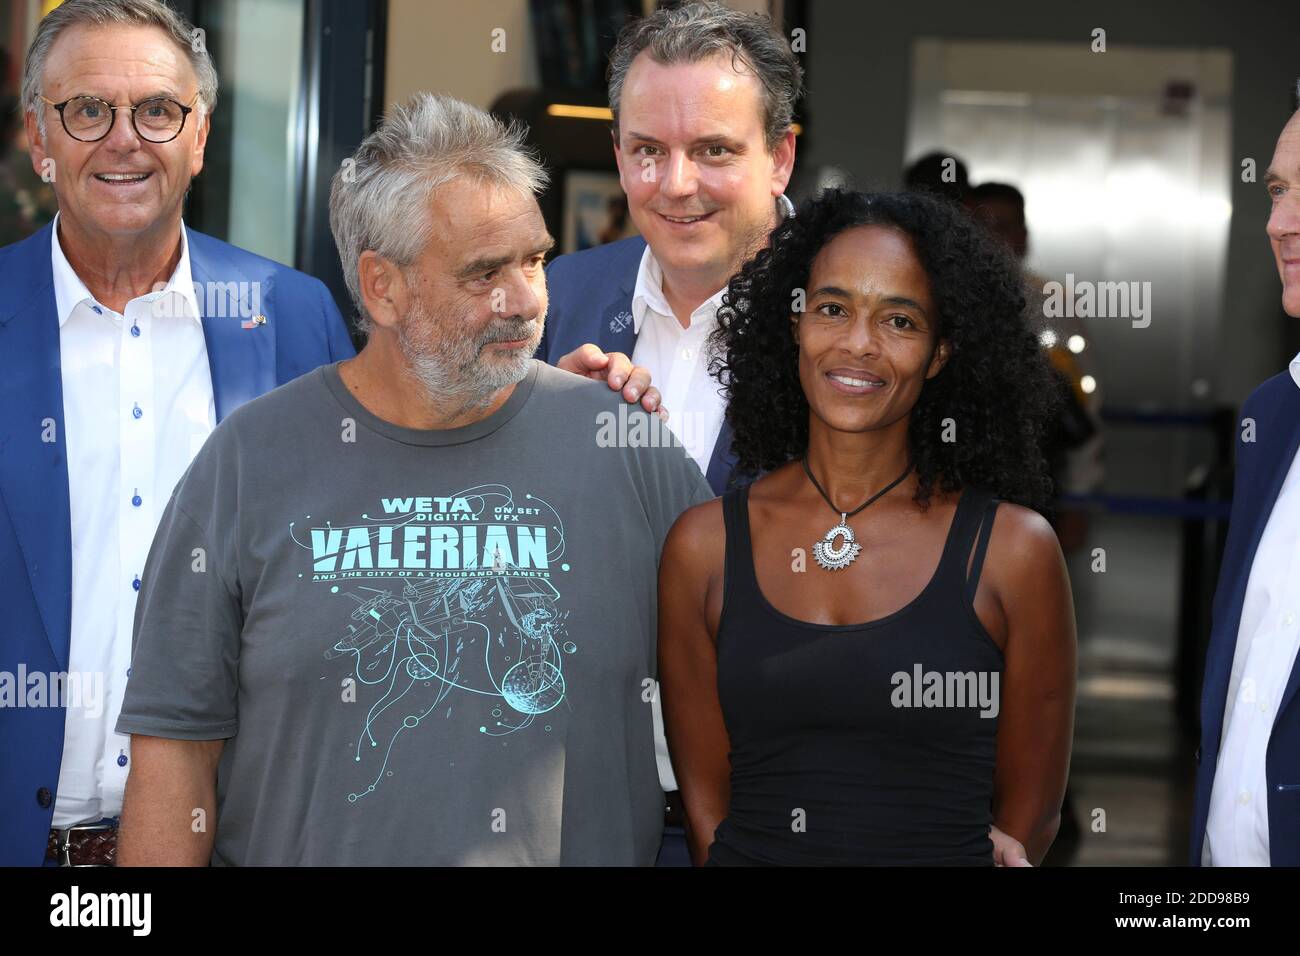 Roland Mack, Michael Mack, Luc Besson and his wife Virginie Besson-Silla attending Eurosat - Coastiality By Valerian Opening held at Europa-Park in Rust, Germany on September 12, 2018. Photo by Jerome Domine/ABACAPRESS.COM Stock Photo